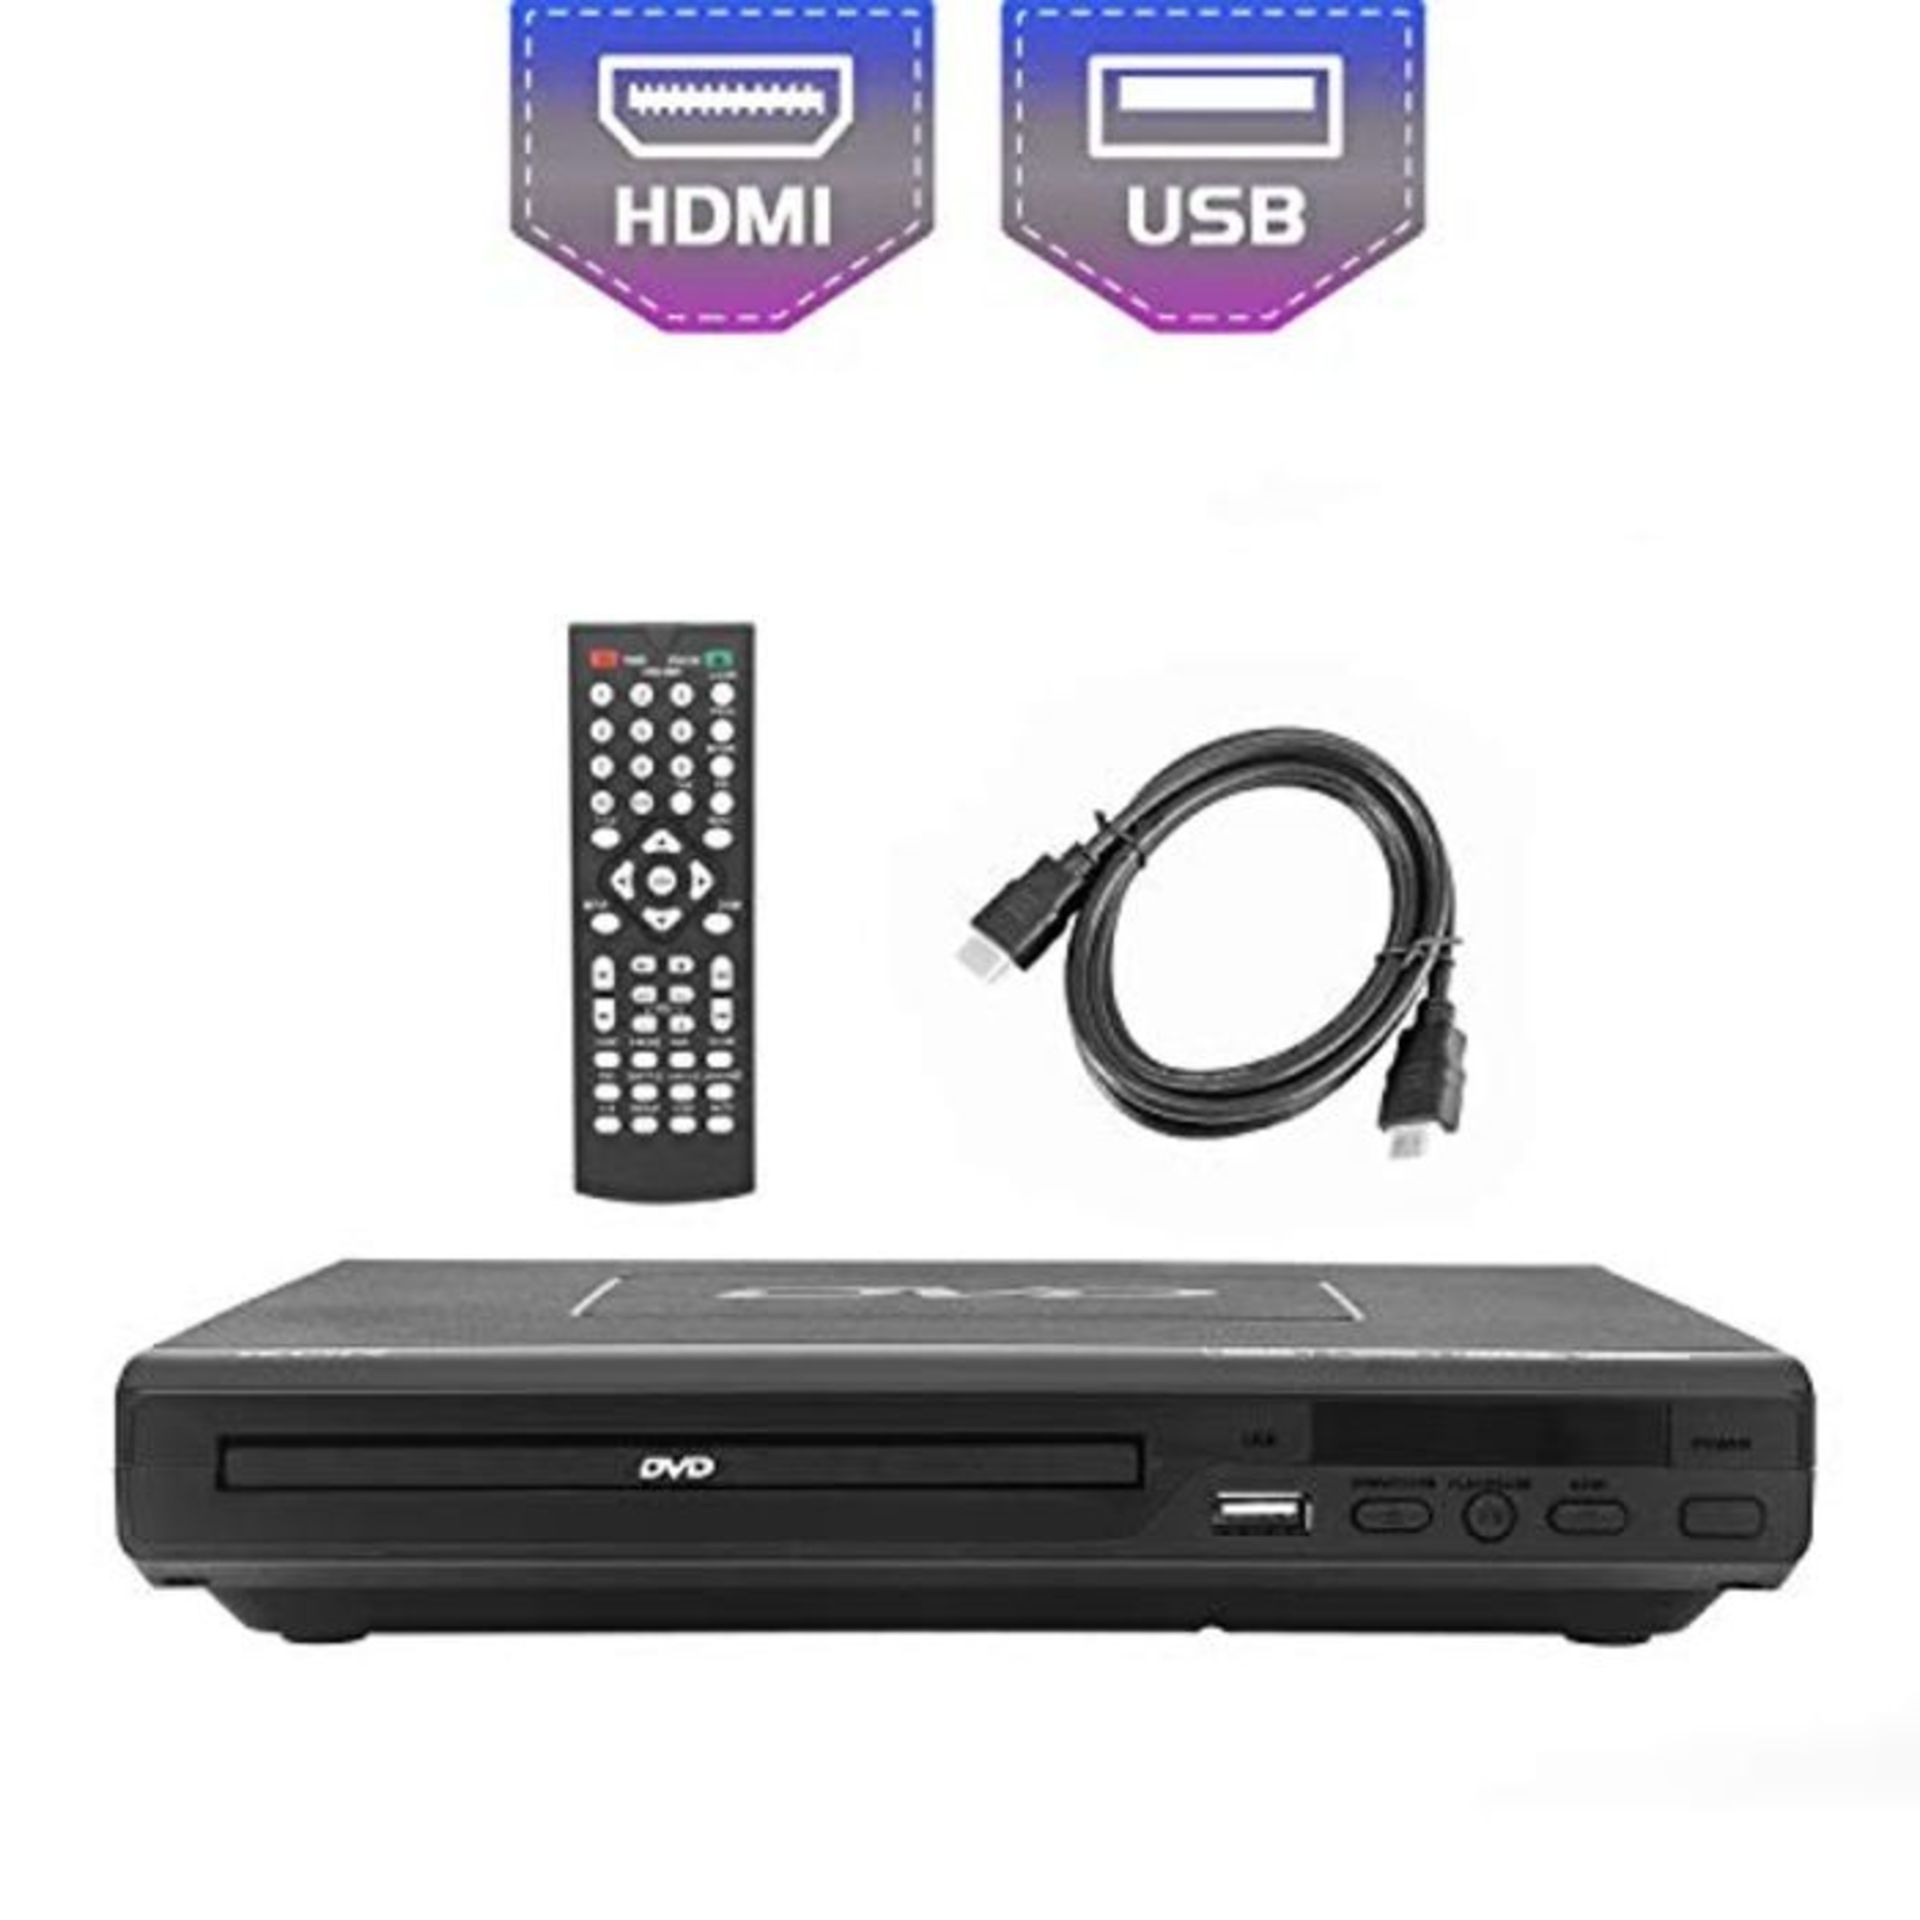 SOYAR DVD Player - Compatible with CD, DVD, MP3 Players with Remote Control, USB Plug